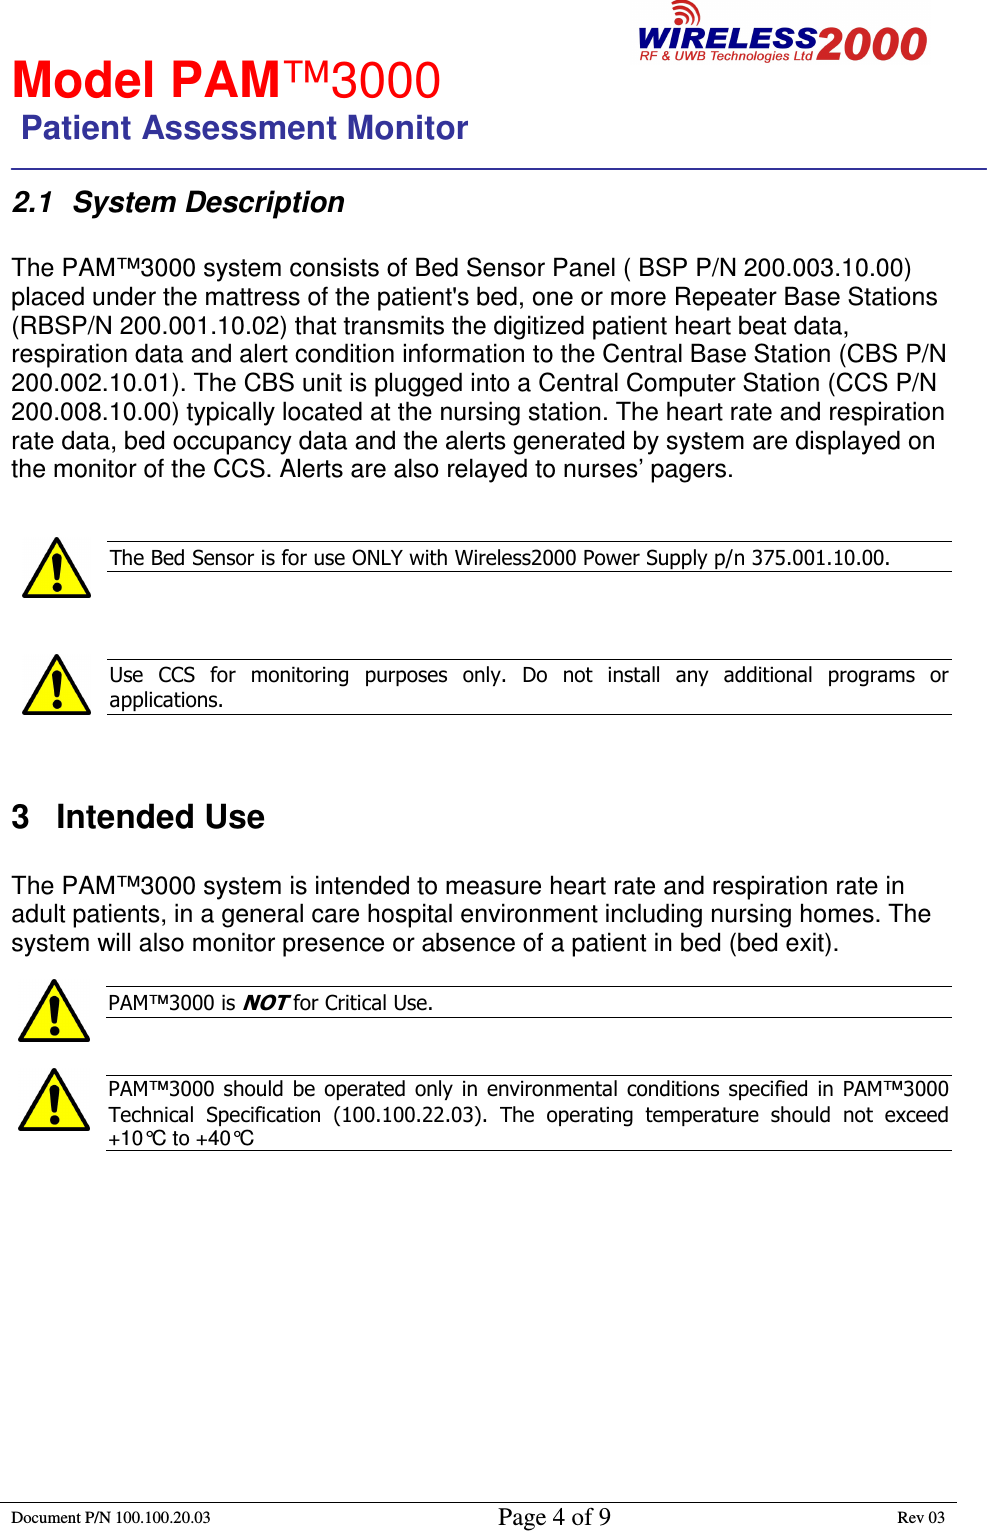                                                        Model PAM™3000                 Patient Assessment Monitor                                                                        Document P/N 100.100.20.03 Page 4 of 9 Rev 03                                                                                                                                         2.1  System Description  The PAM™3000 system consists of Bed Sensor Panel ( BSP P/N 200.003.10.00) placed under the mattress of the patient&apos;s bed, one or more Repeater Base Stations (RBSP/N 200.001.10.02) that transmits the digitized patient heart beat data, respiration data and alert condition information to the Central Base Station (CBS P/N 200.002.10.01). The CBS unit is plugged into a Central Computer Station (CCS P/N 200.008.10.00) typically located at the nursing station. The heart rate and respiration rate data, bed occupancy data and the alerts generated by system are displayed on the monitor of the CCS. Alerts are also relayed to nurses’ pagers.   The Bed Sensor is for use ONLY with Wireless2000 Power Supply p/n 375.001.10.00.     Use  CCS  for  monitoring  purposes  only.  Do  not  install  any  additional  programs  or applications.    3  Intended Use  The PAM™3000 system is intended to measure heart rate and respiration rate in adult patients, in a general care hospital environment including nursing homes. The system will also monitor presence or absence of a patient in bed (bed exit).  PAM™3000 is NOT for Critical Use.    PAM™3000  should  be  operated  only in environmental  conditions  specified  in  PAM™3000 Technical  Specification  (100.100.22.03).  The  operating  temperature  should  not  exceed +10°C to +40°C            